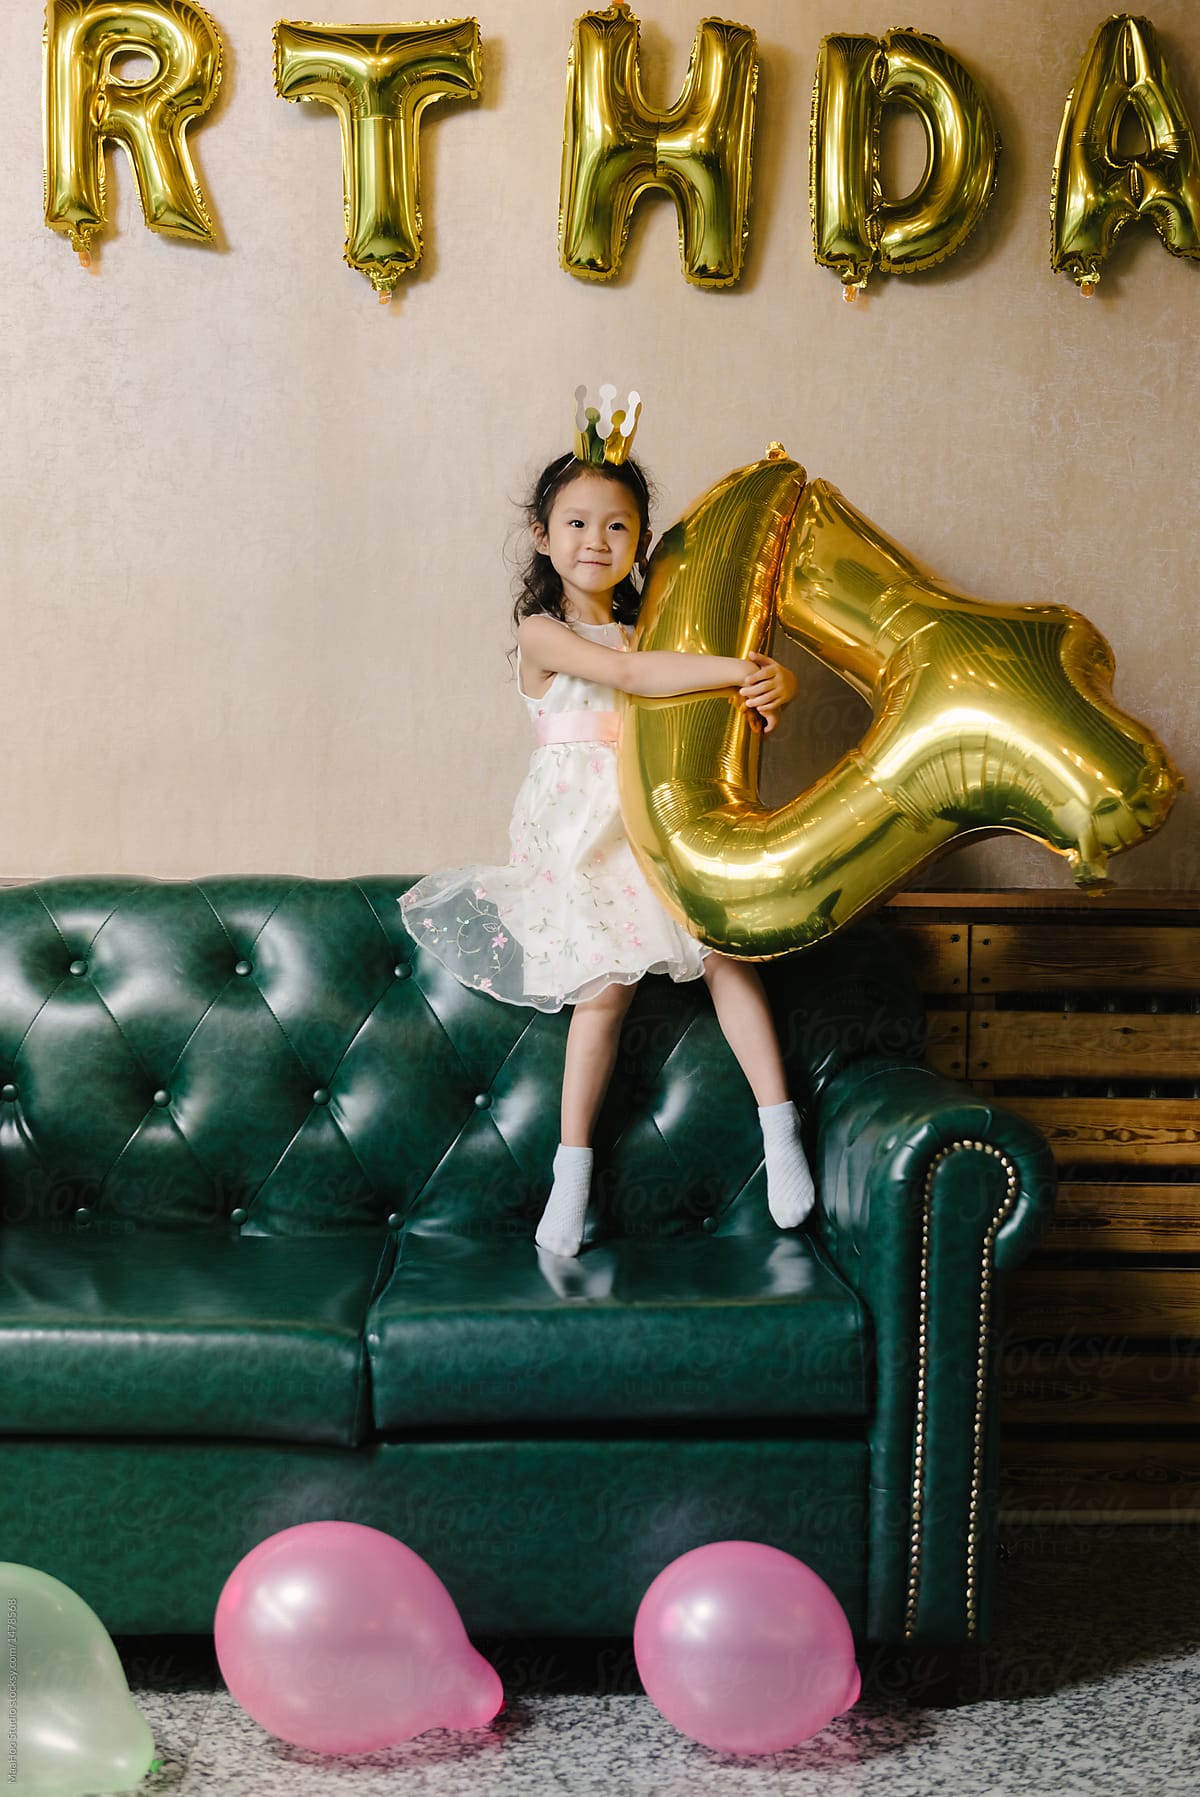 Adorable Girl At Her Birthday Party By Stocksy Contributor Maahoo Stocksy